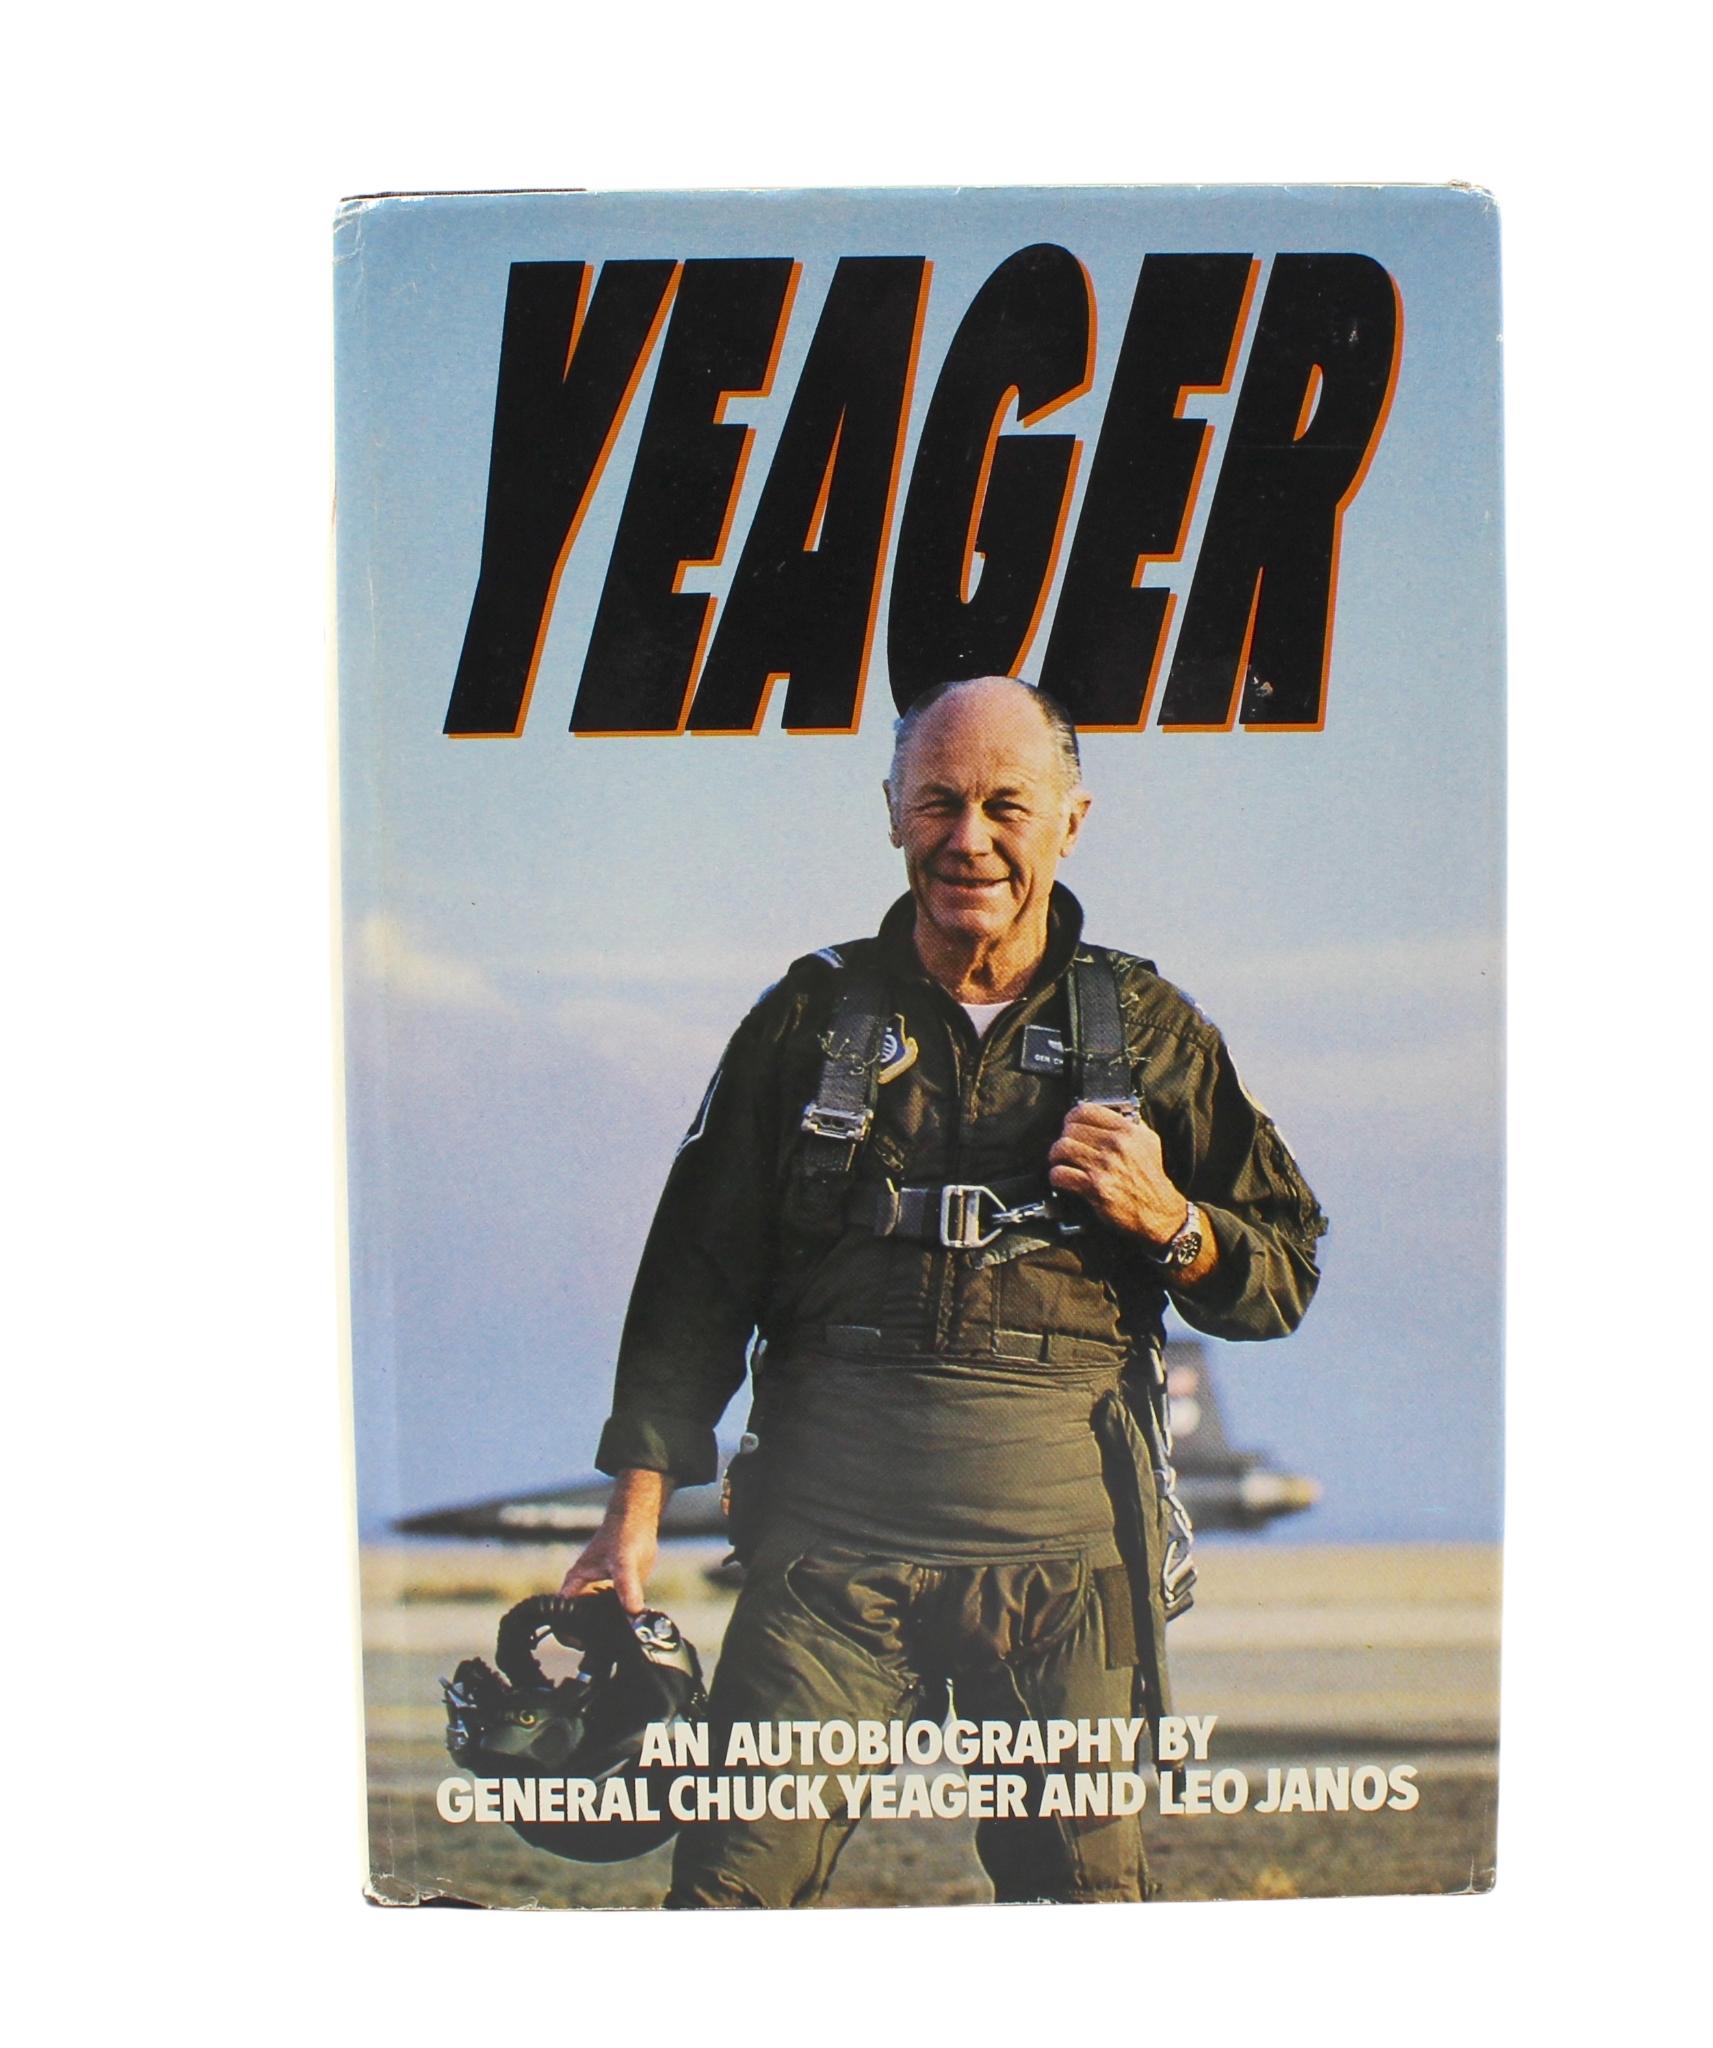 Yeager, Chuck and Leo Janos. Yeager: An Autobiography. New York: Bantam Books, 1985. Signed by Chuck Yeager. Third edition. In the original dust jacket and hardcover boards. Presented in a custom archival slipcase.

Presented is a signed, third